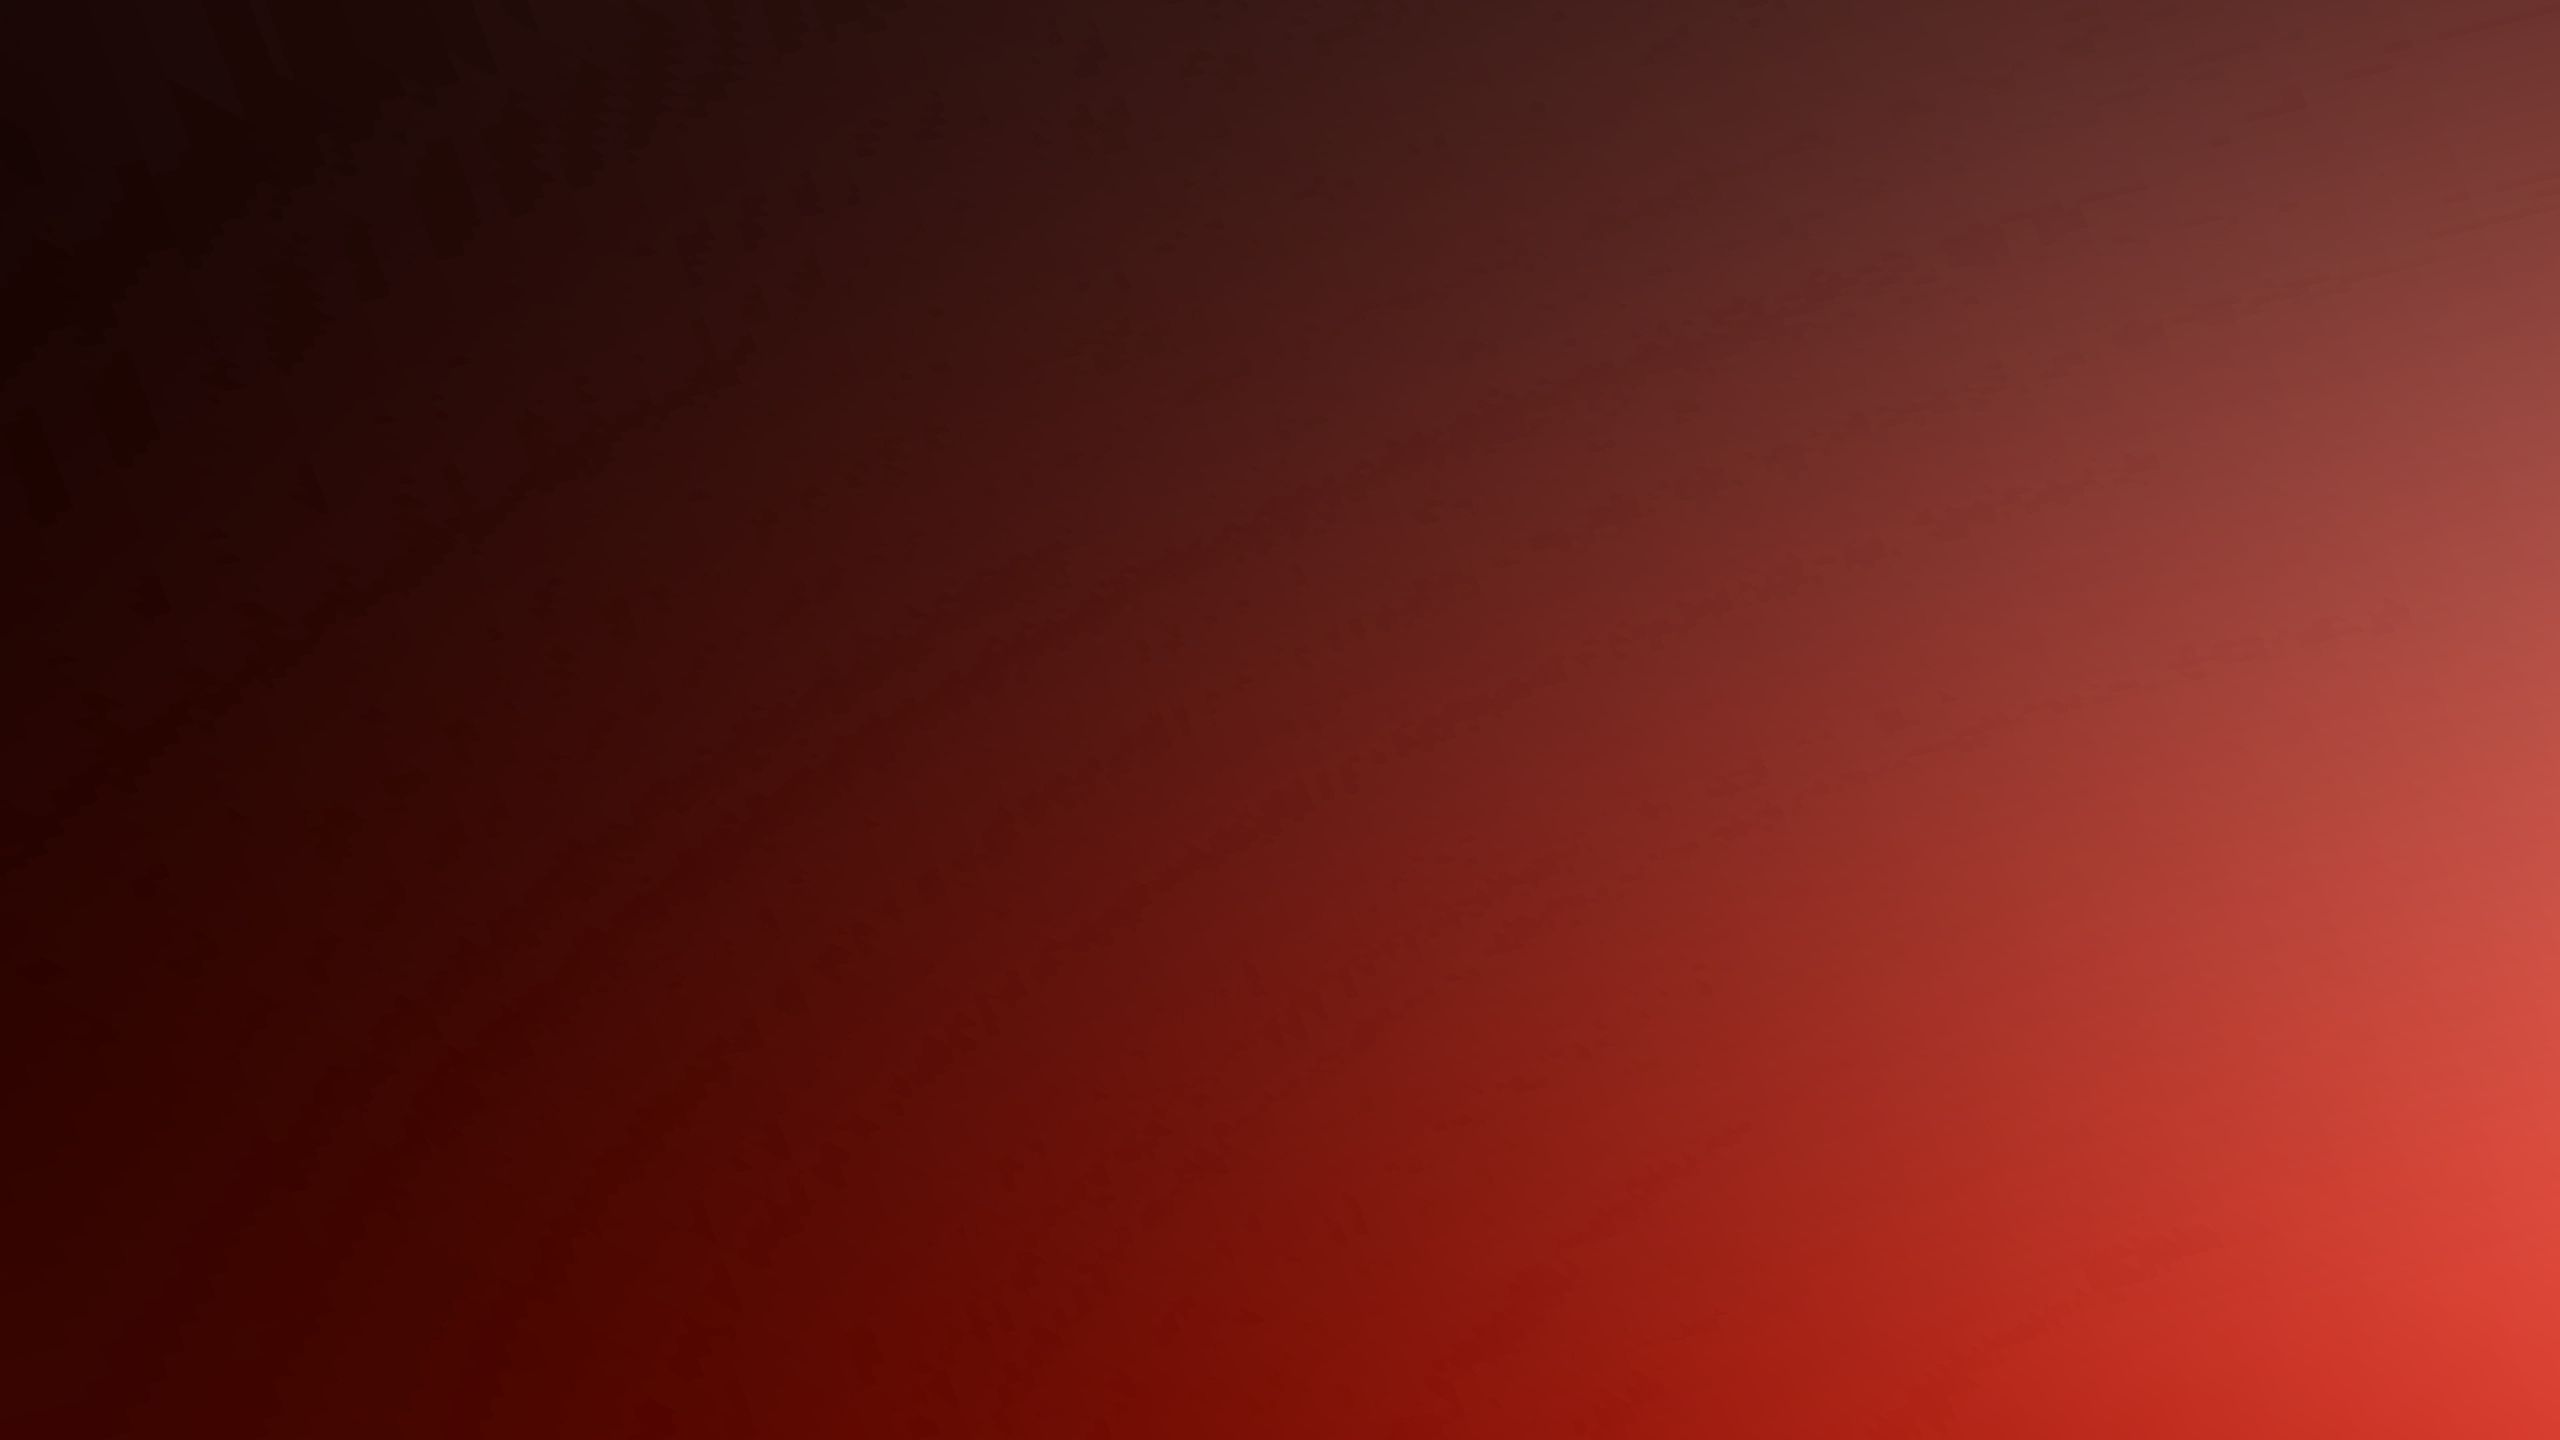 Download wallpaper 2560x1440 pale, red, white, shadow widescreen 16:9 HD background